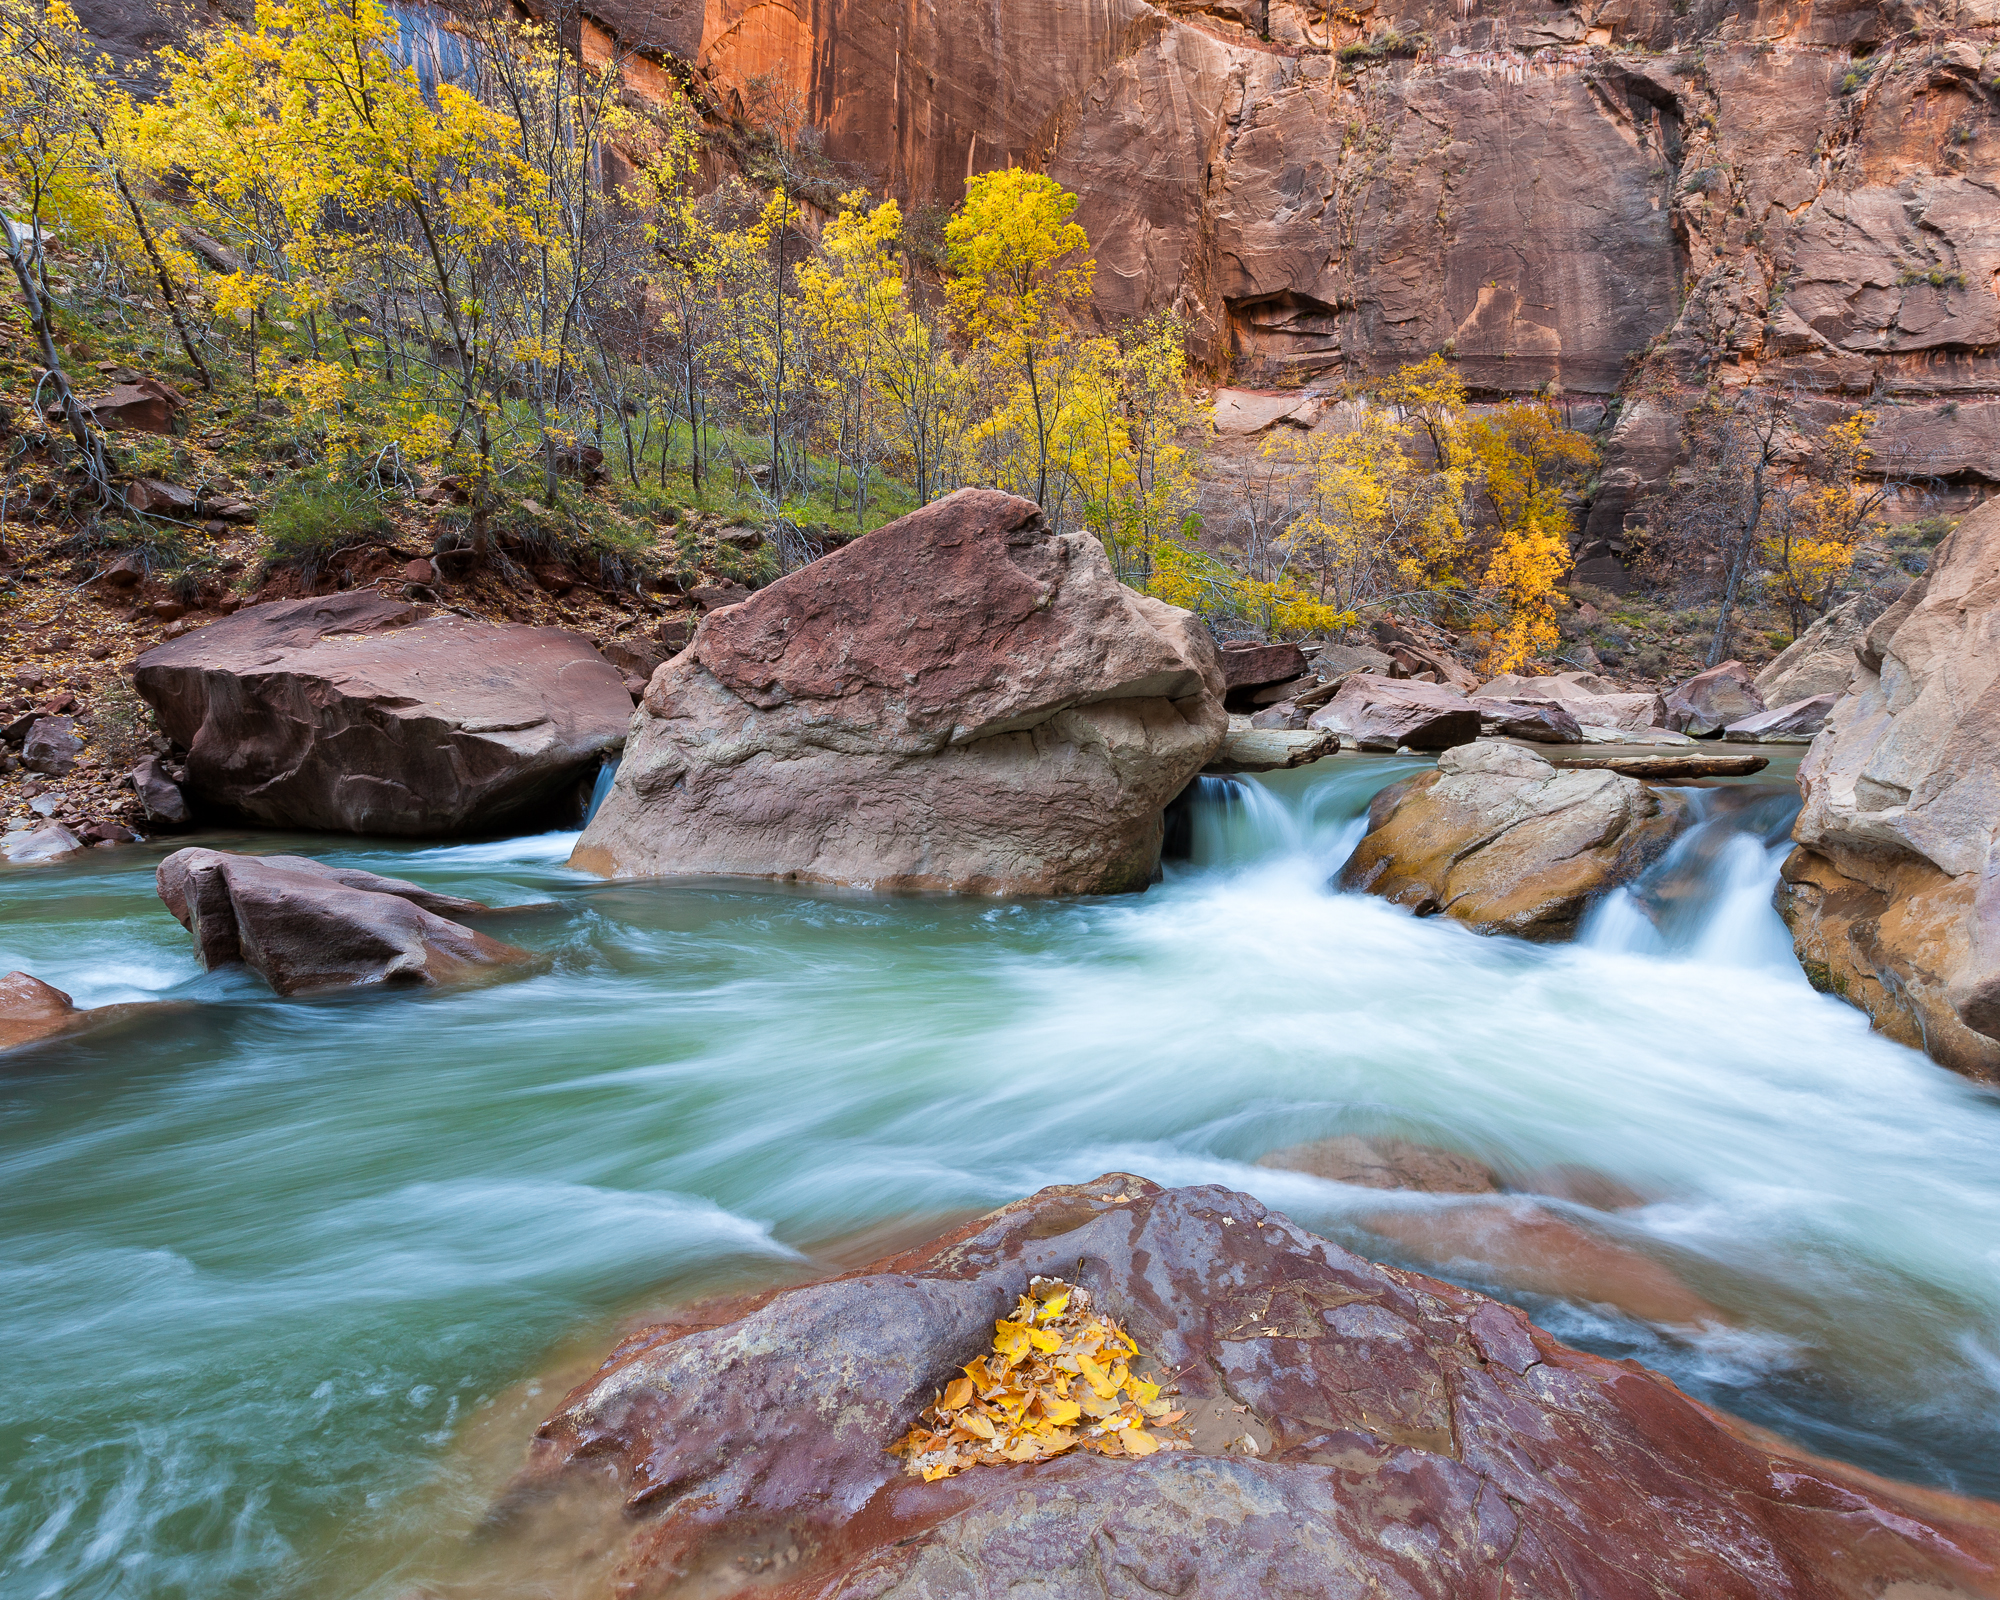 The Virgin River rushes over small waterfalls below colorful autumn foliage as it flows through Zion Canyon near the Temple of Sinawava in Zion National Park, Utah.